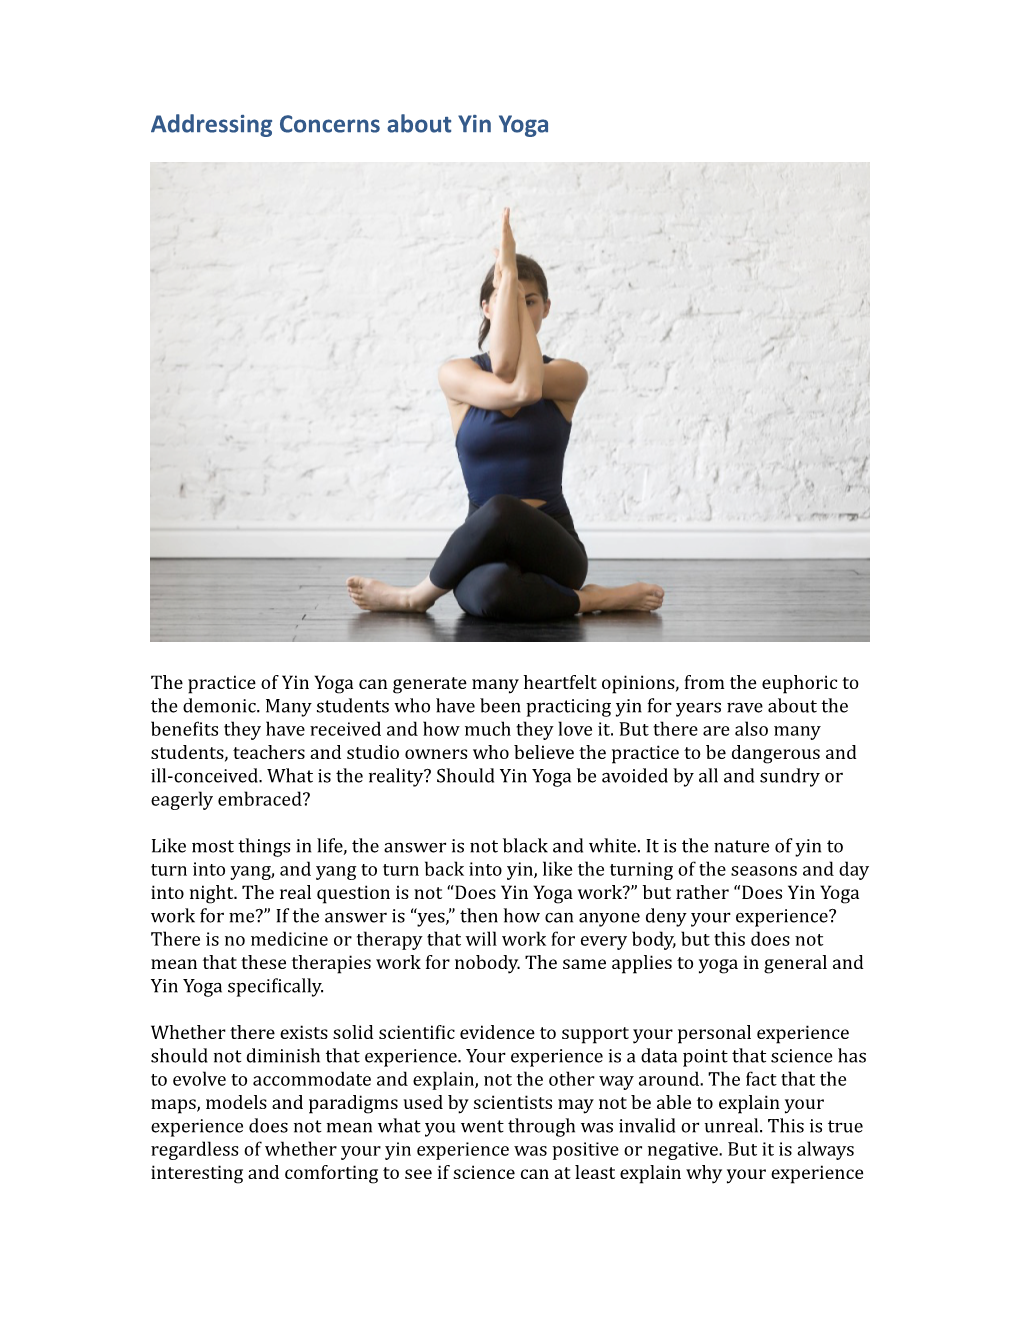 Addressing Concerns About Yin Yoga V2.1.Pages